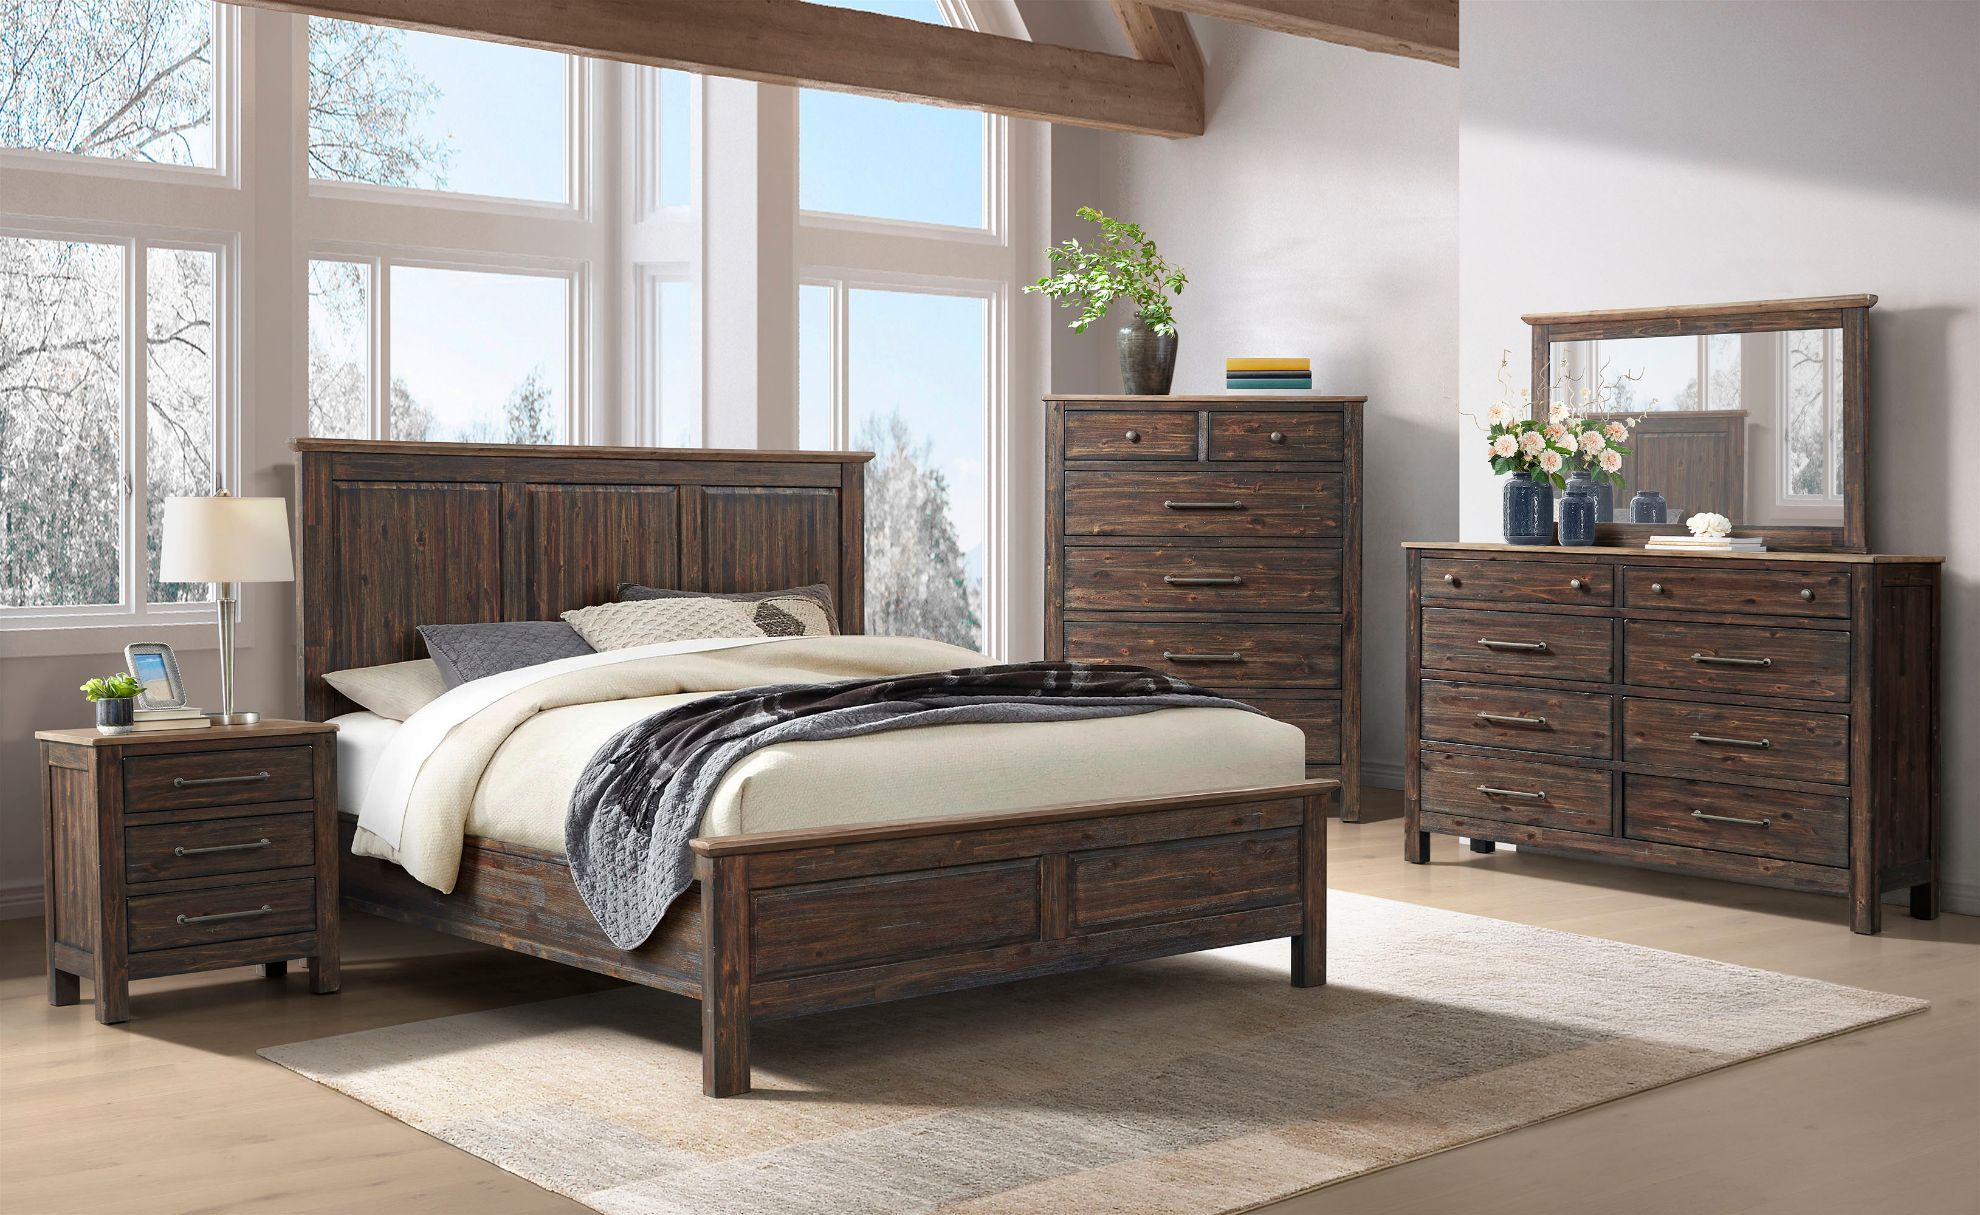 Picture of Transitions King Bedroom Set